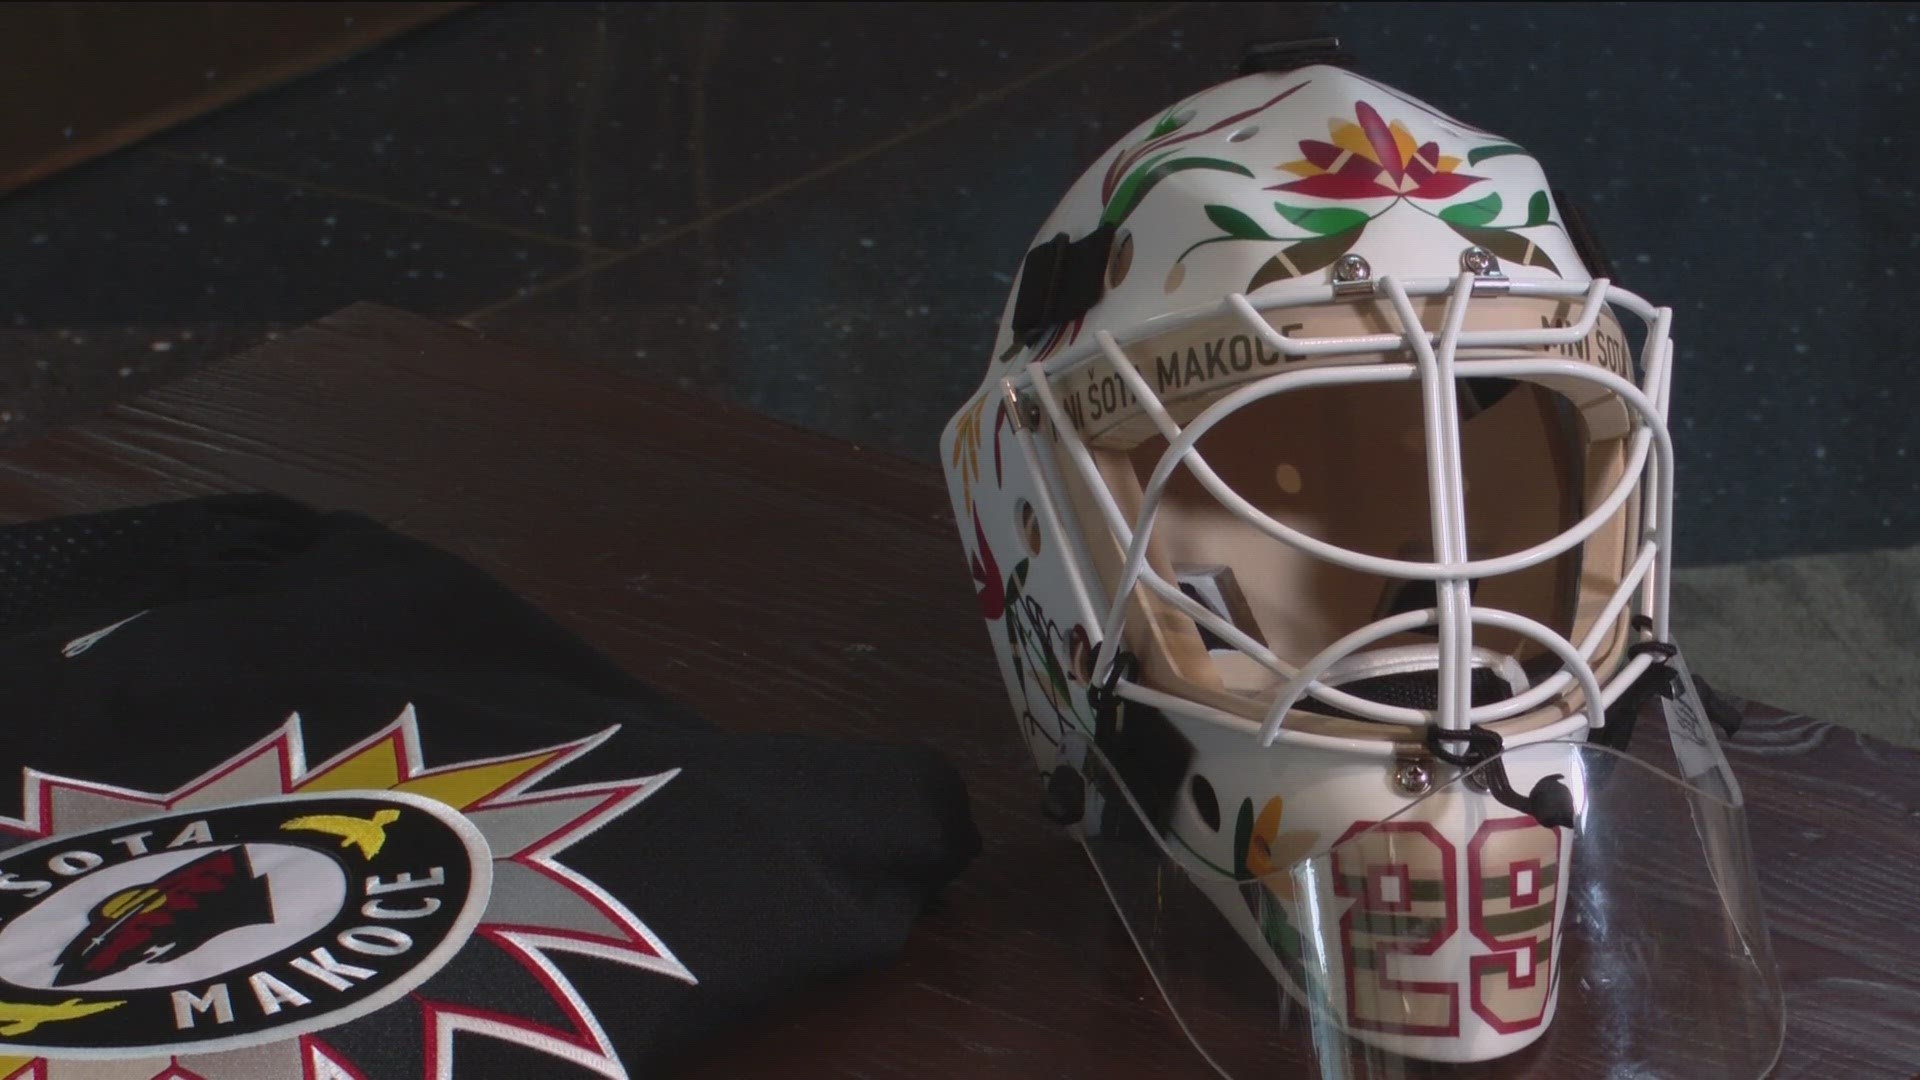 Minnesota Historical Society purchased the mask at auction for $35,000, with proceeds going to the Minnesota Wild Foundation and the American Indian Family Center.